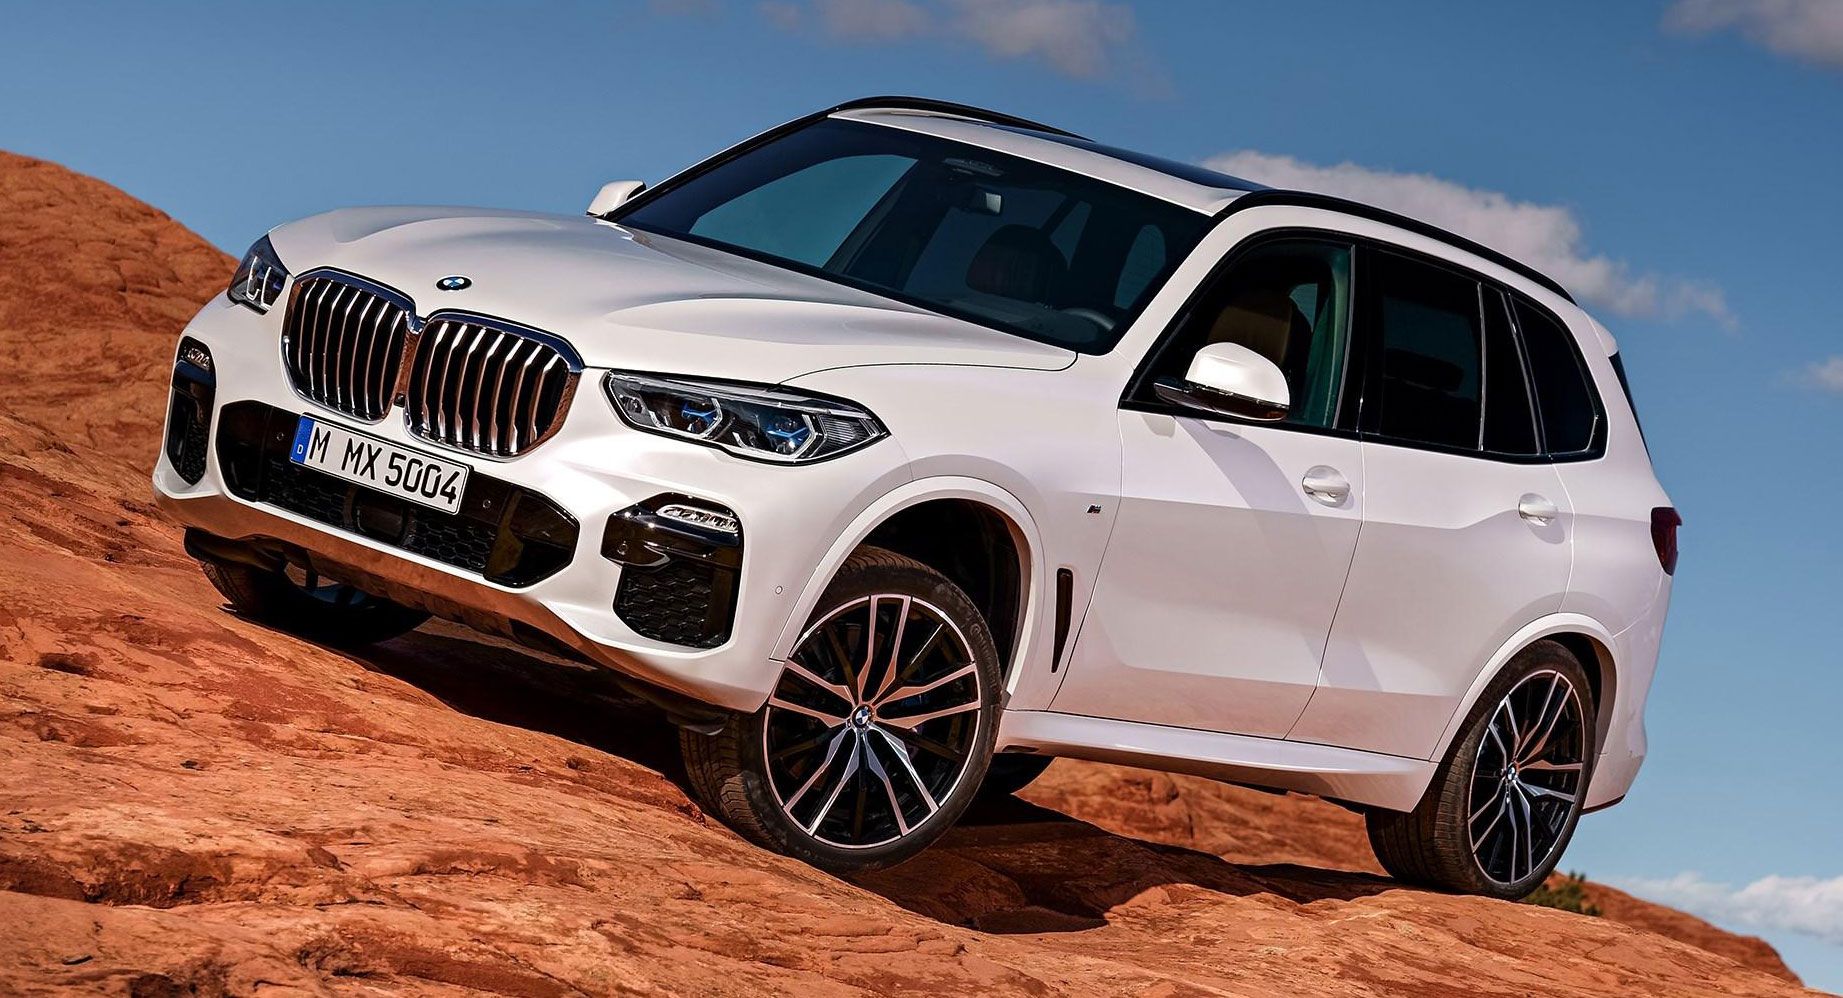 https://www.carscoops.com/wp-content/uploads/2018/06/2019-BMW-X5-G05-Carscoops-5545.jpg